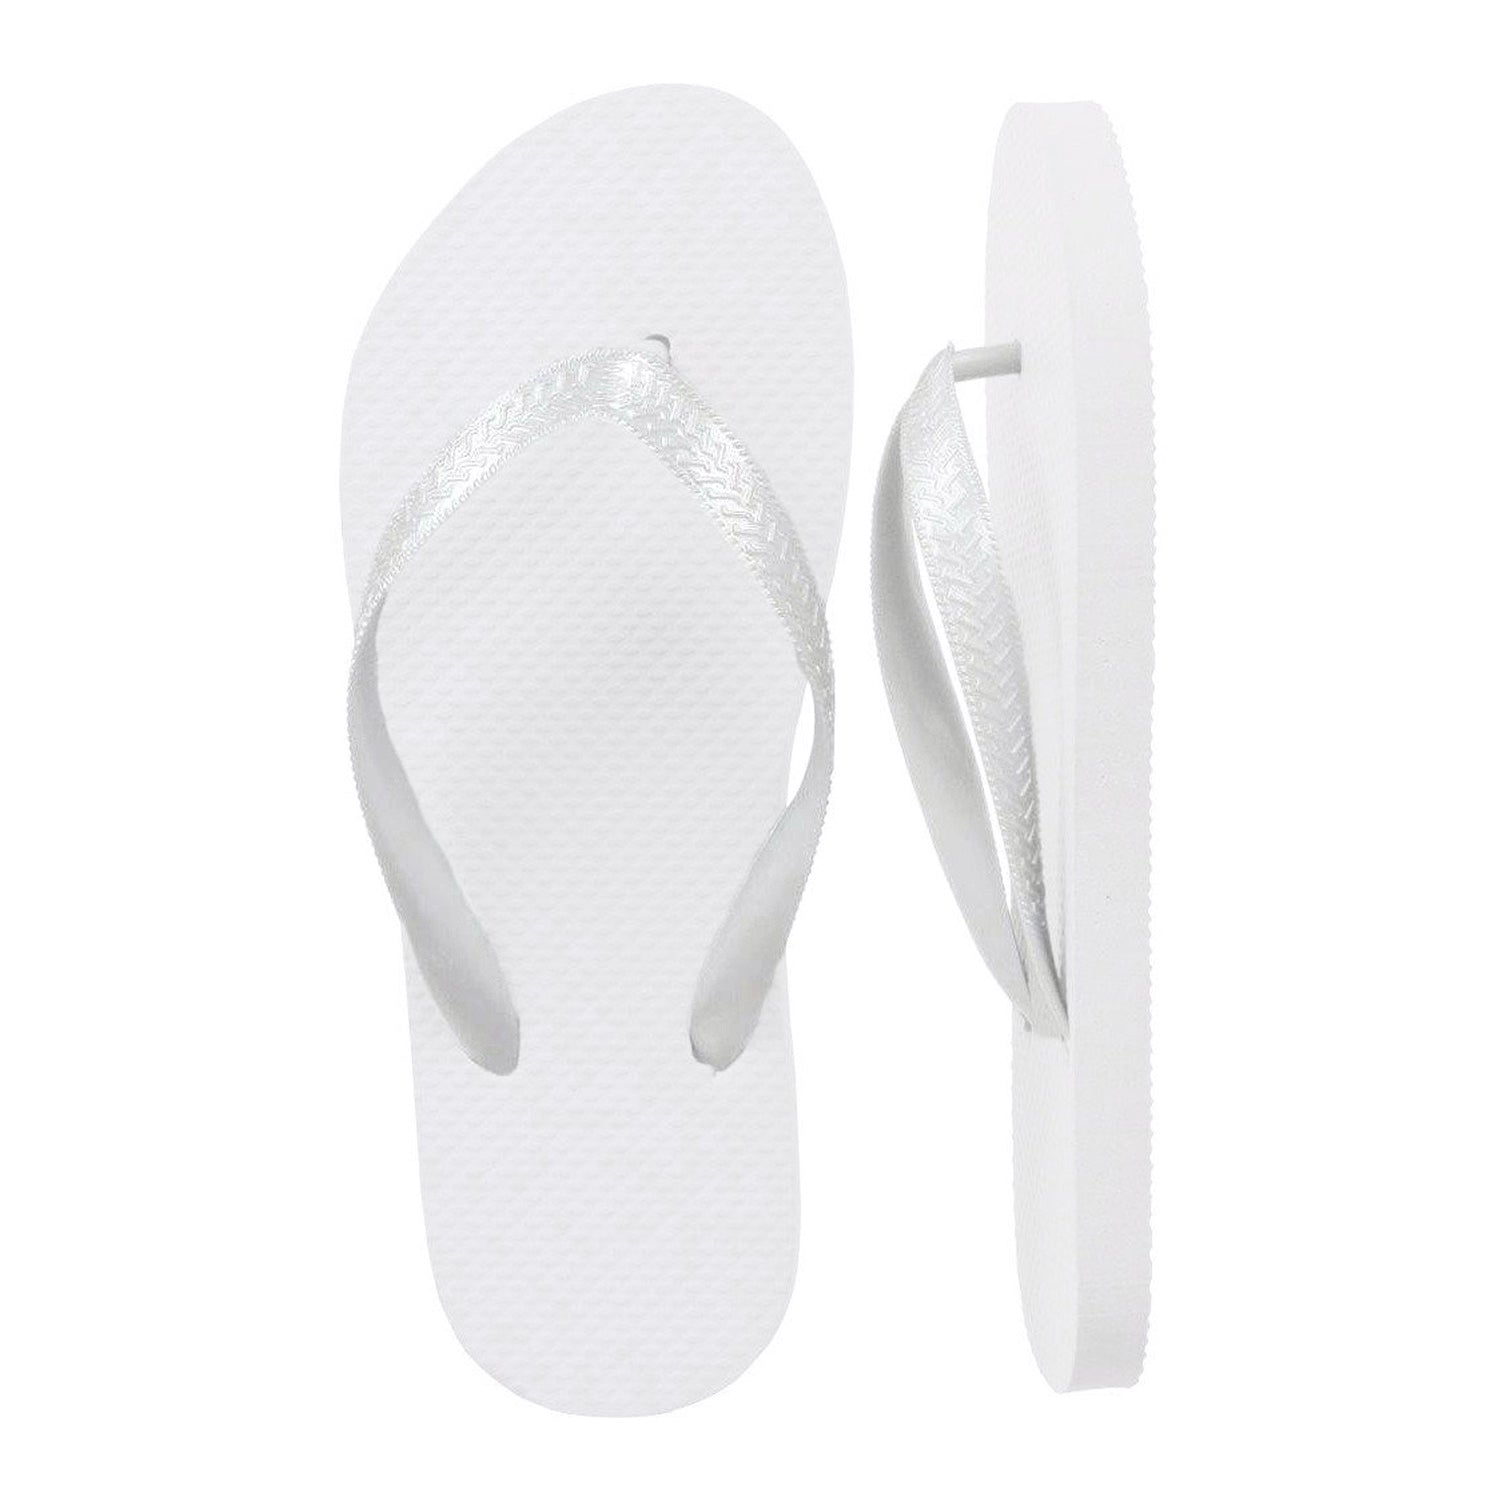 Pearly White Flip Flops in Bulk, 20 Pairs